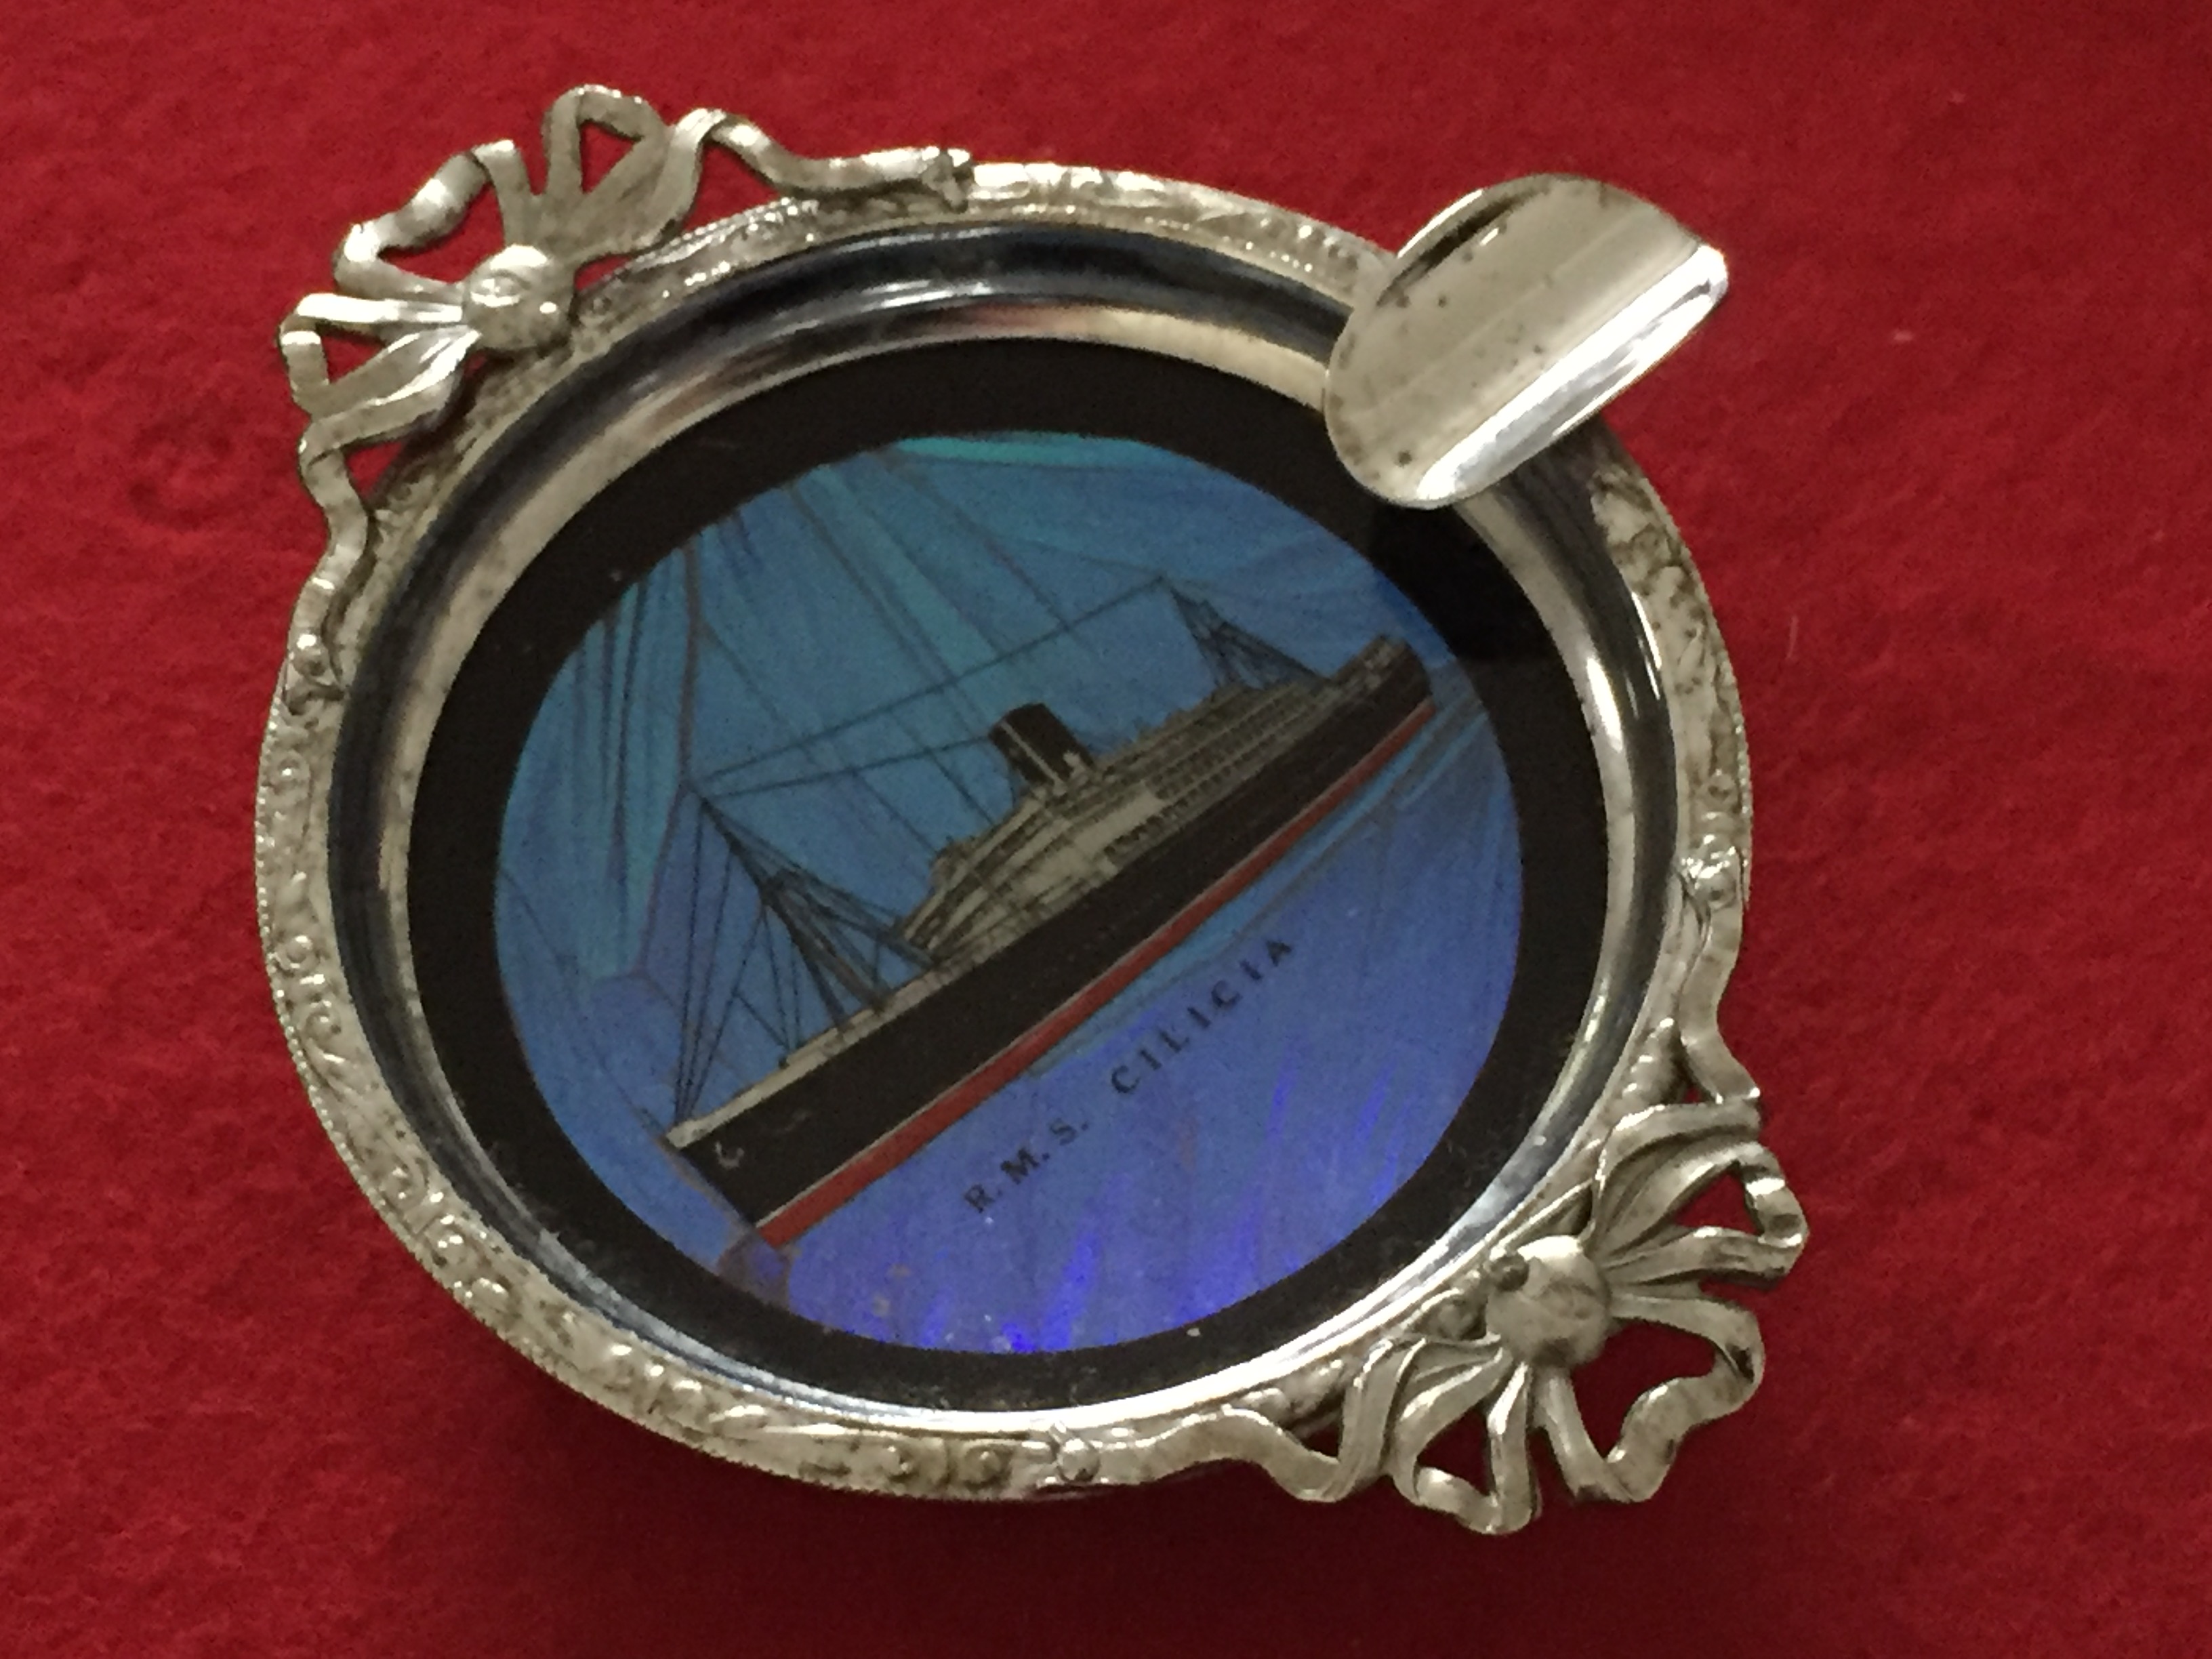 VERY RARE FIND OF A SOUVENIR DISH FROM THE VESSEL THE RMS CILICIA